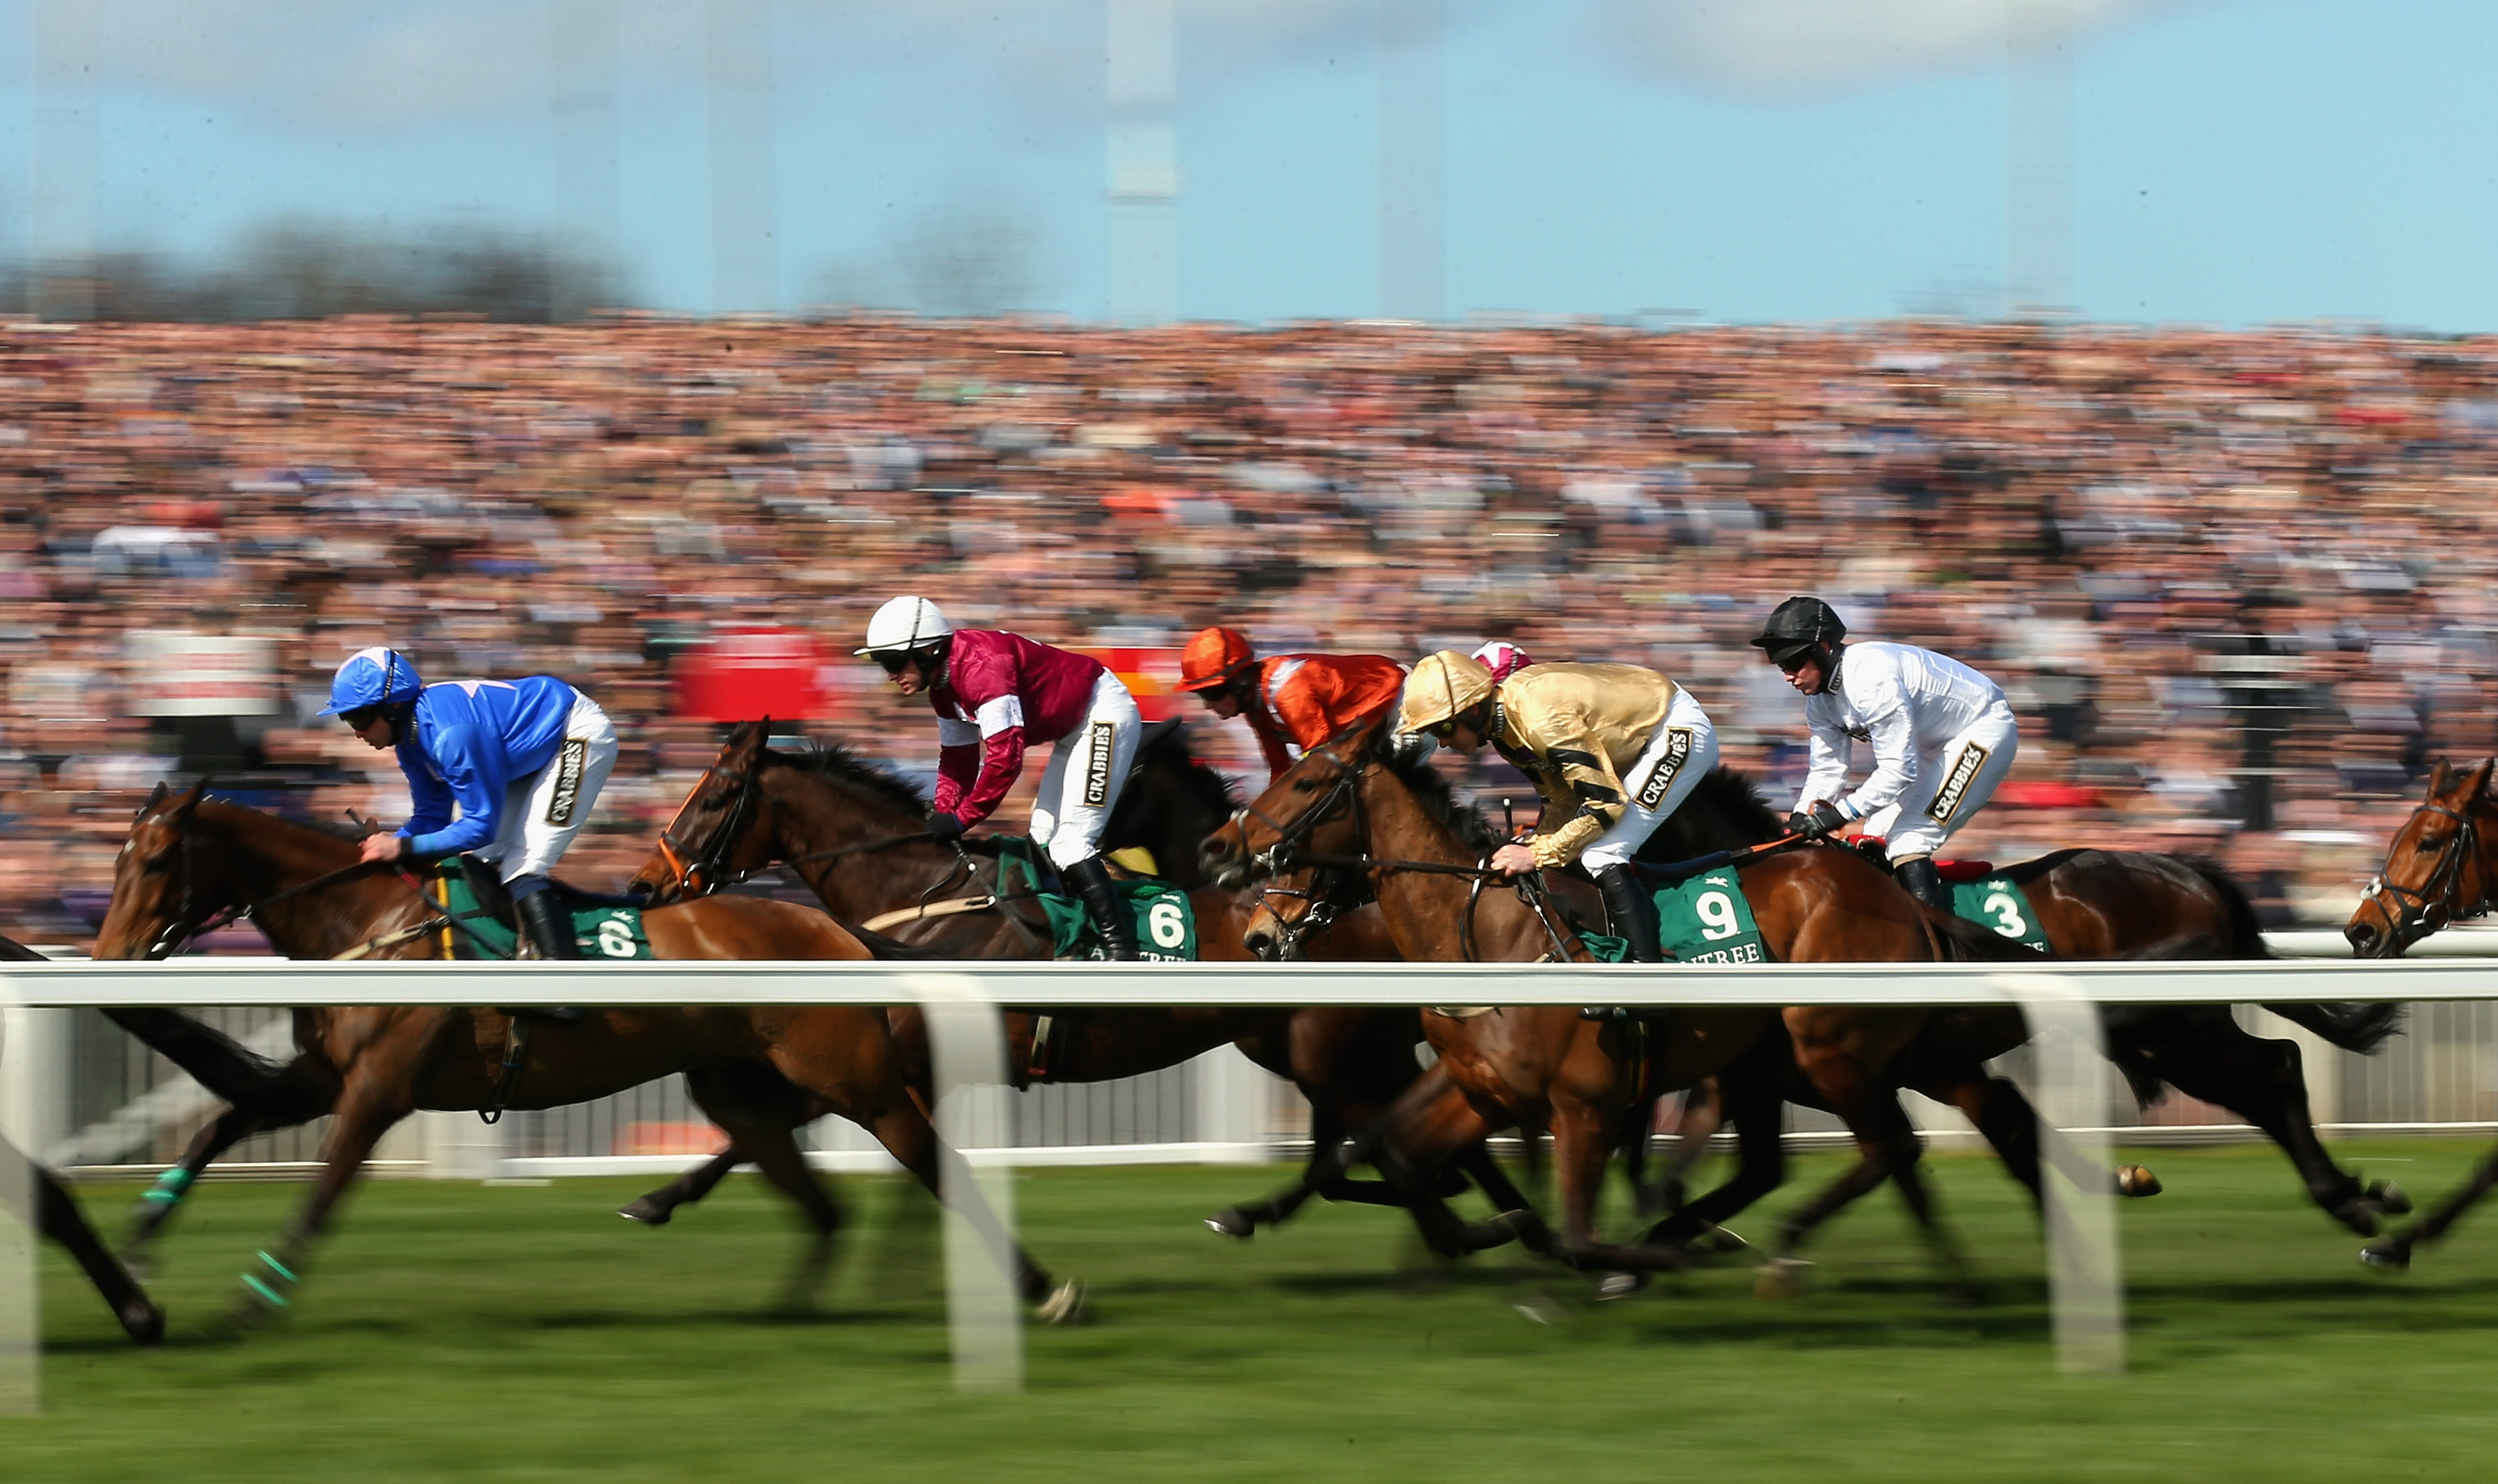 Grand National 2016: Time, TV Channel & Race Information | Heavy.com